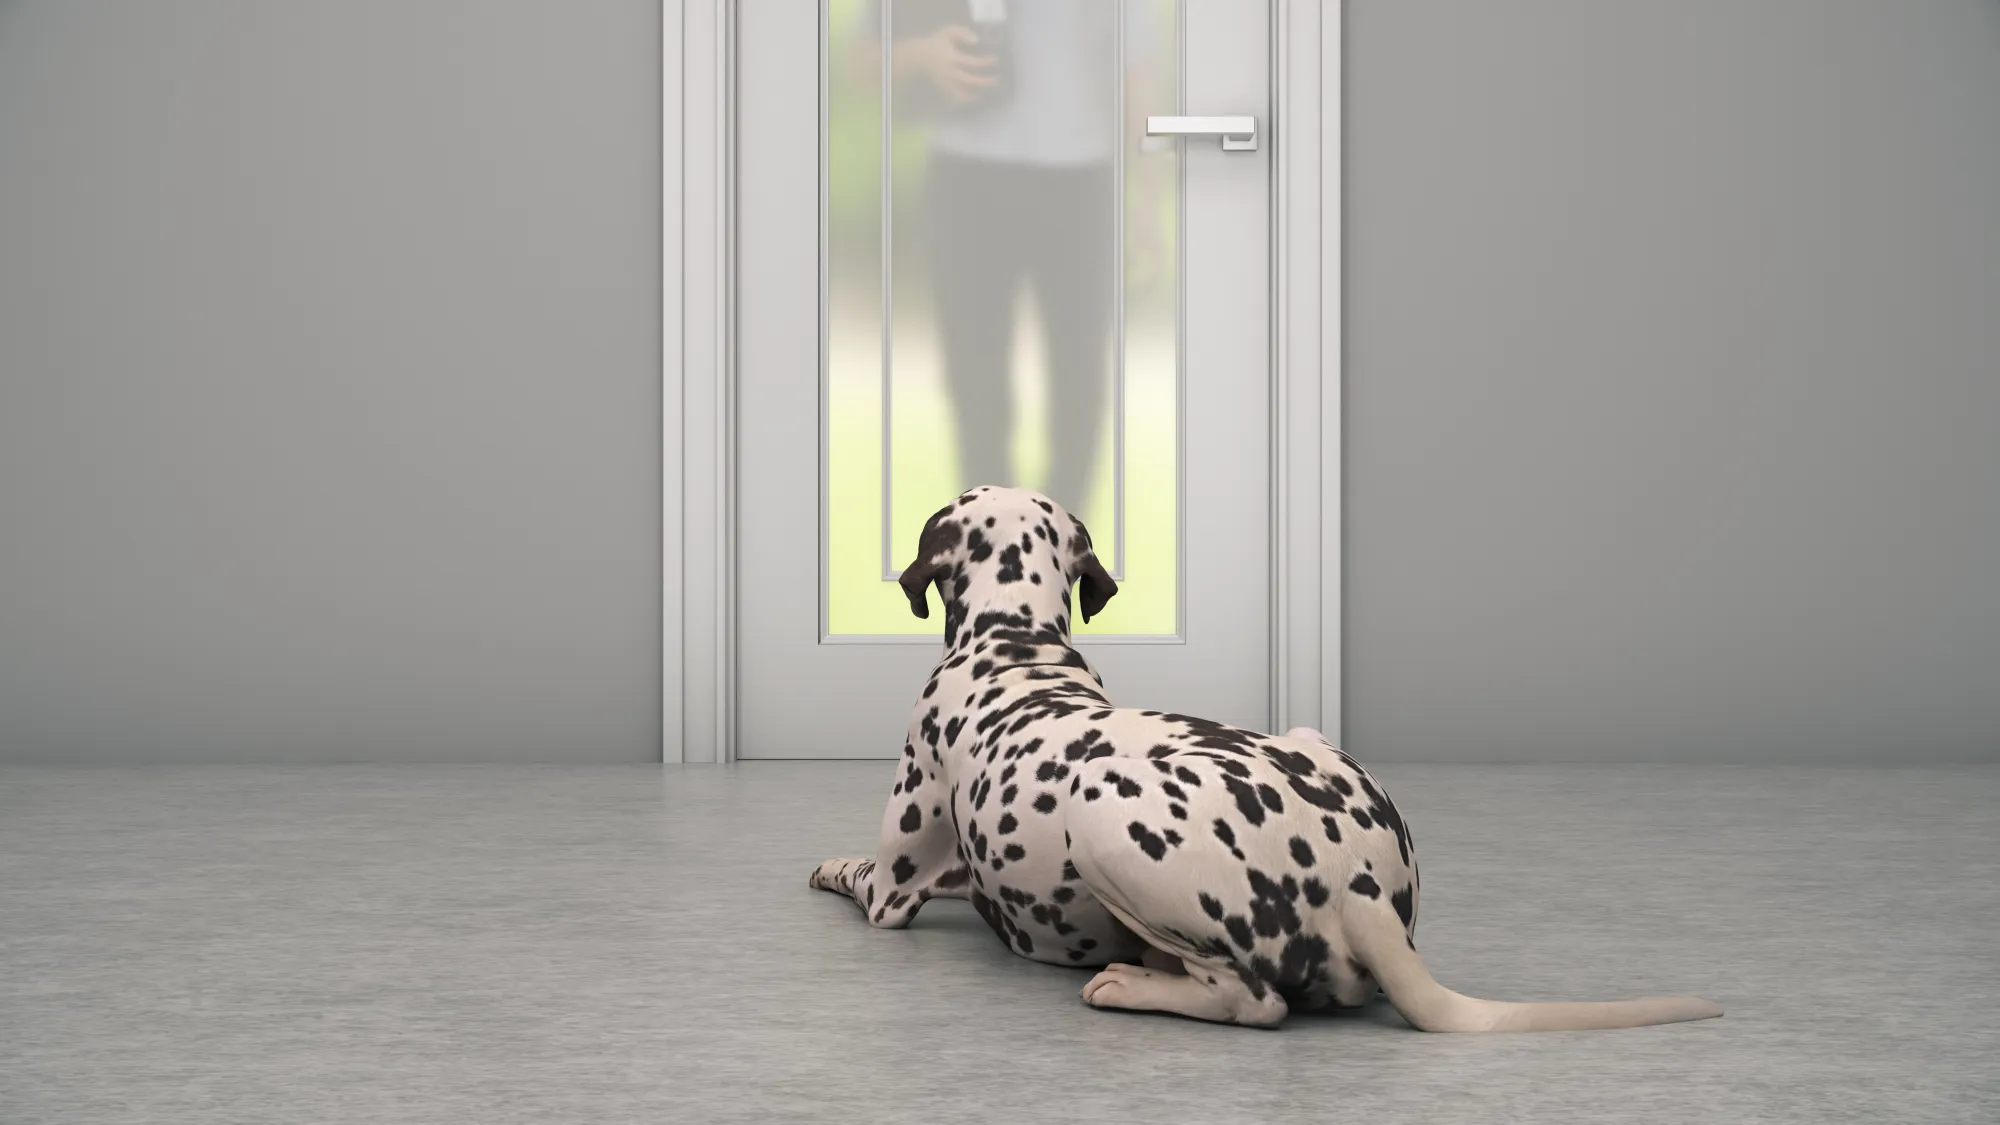 How to Protect Your Door from Dog Scratching